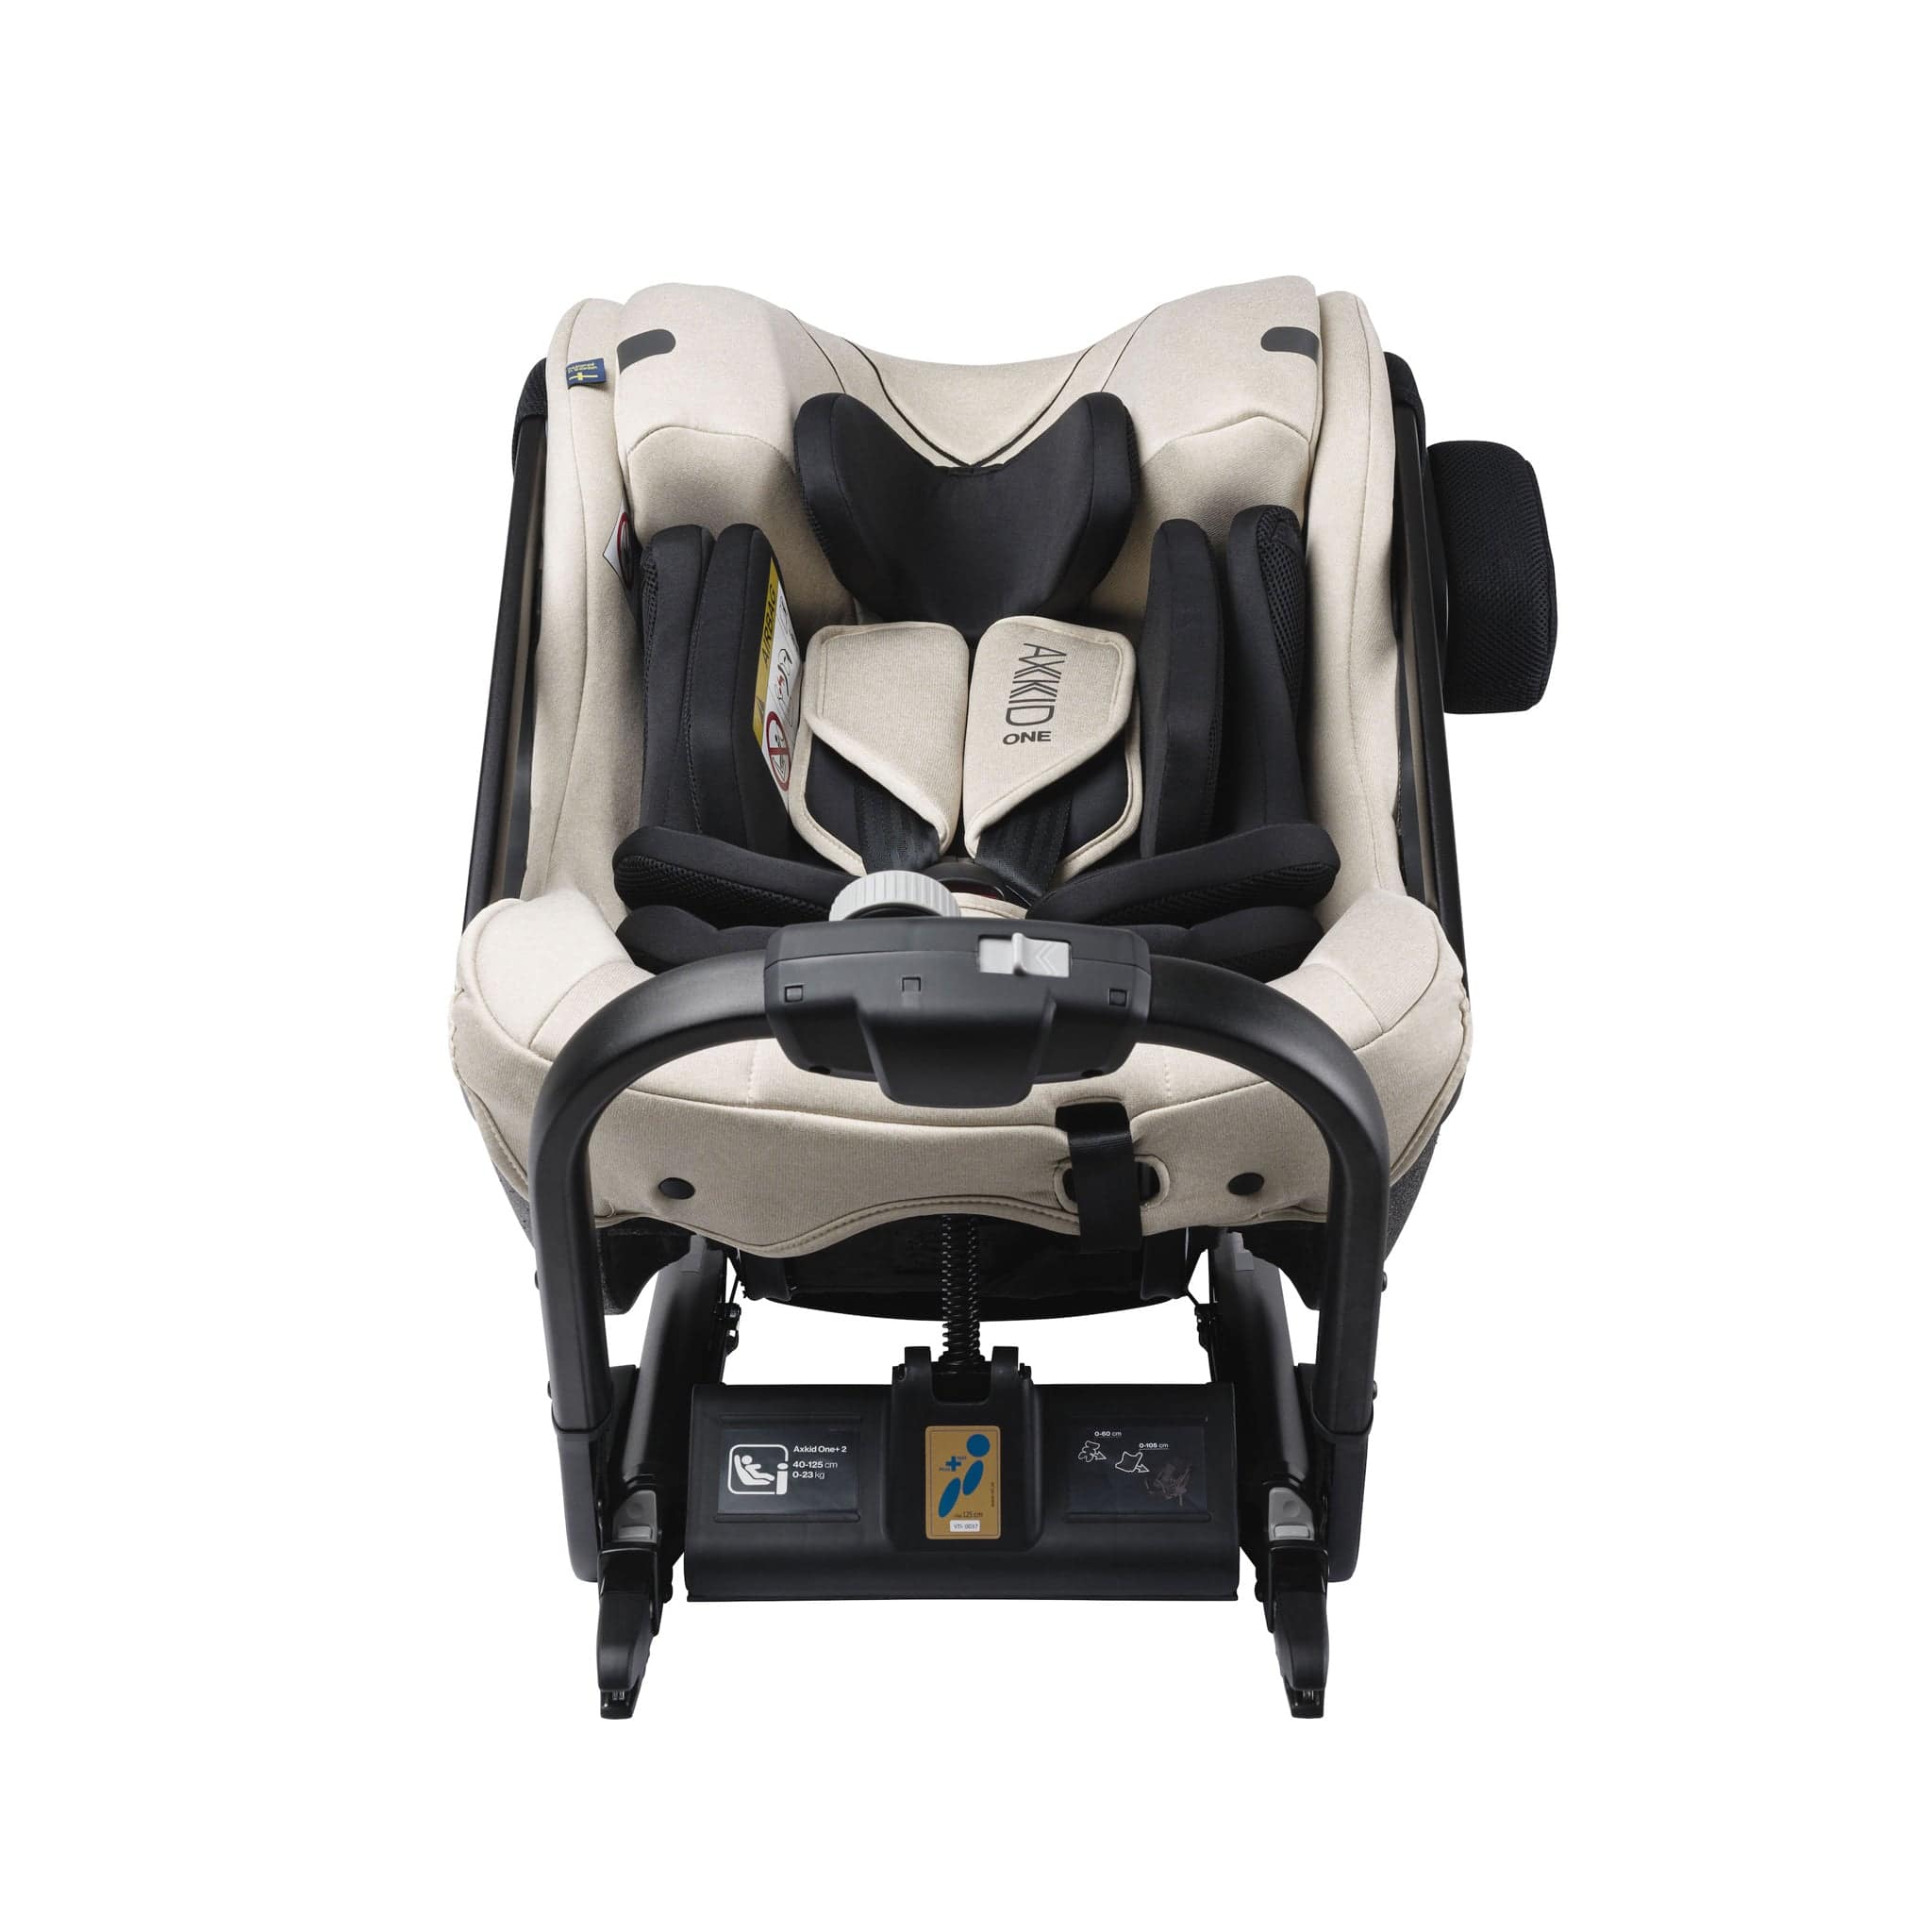 Axkid One 2 + in Brick Melange Extended Rear Facing Car Seats 25120124